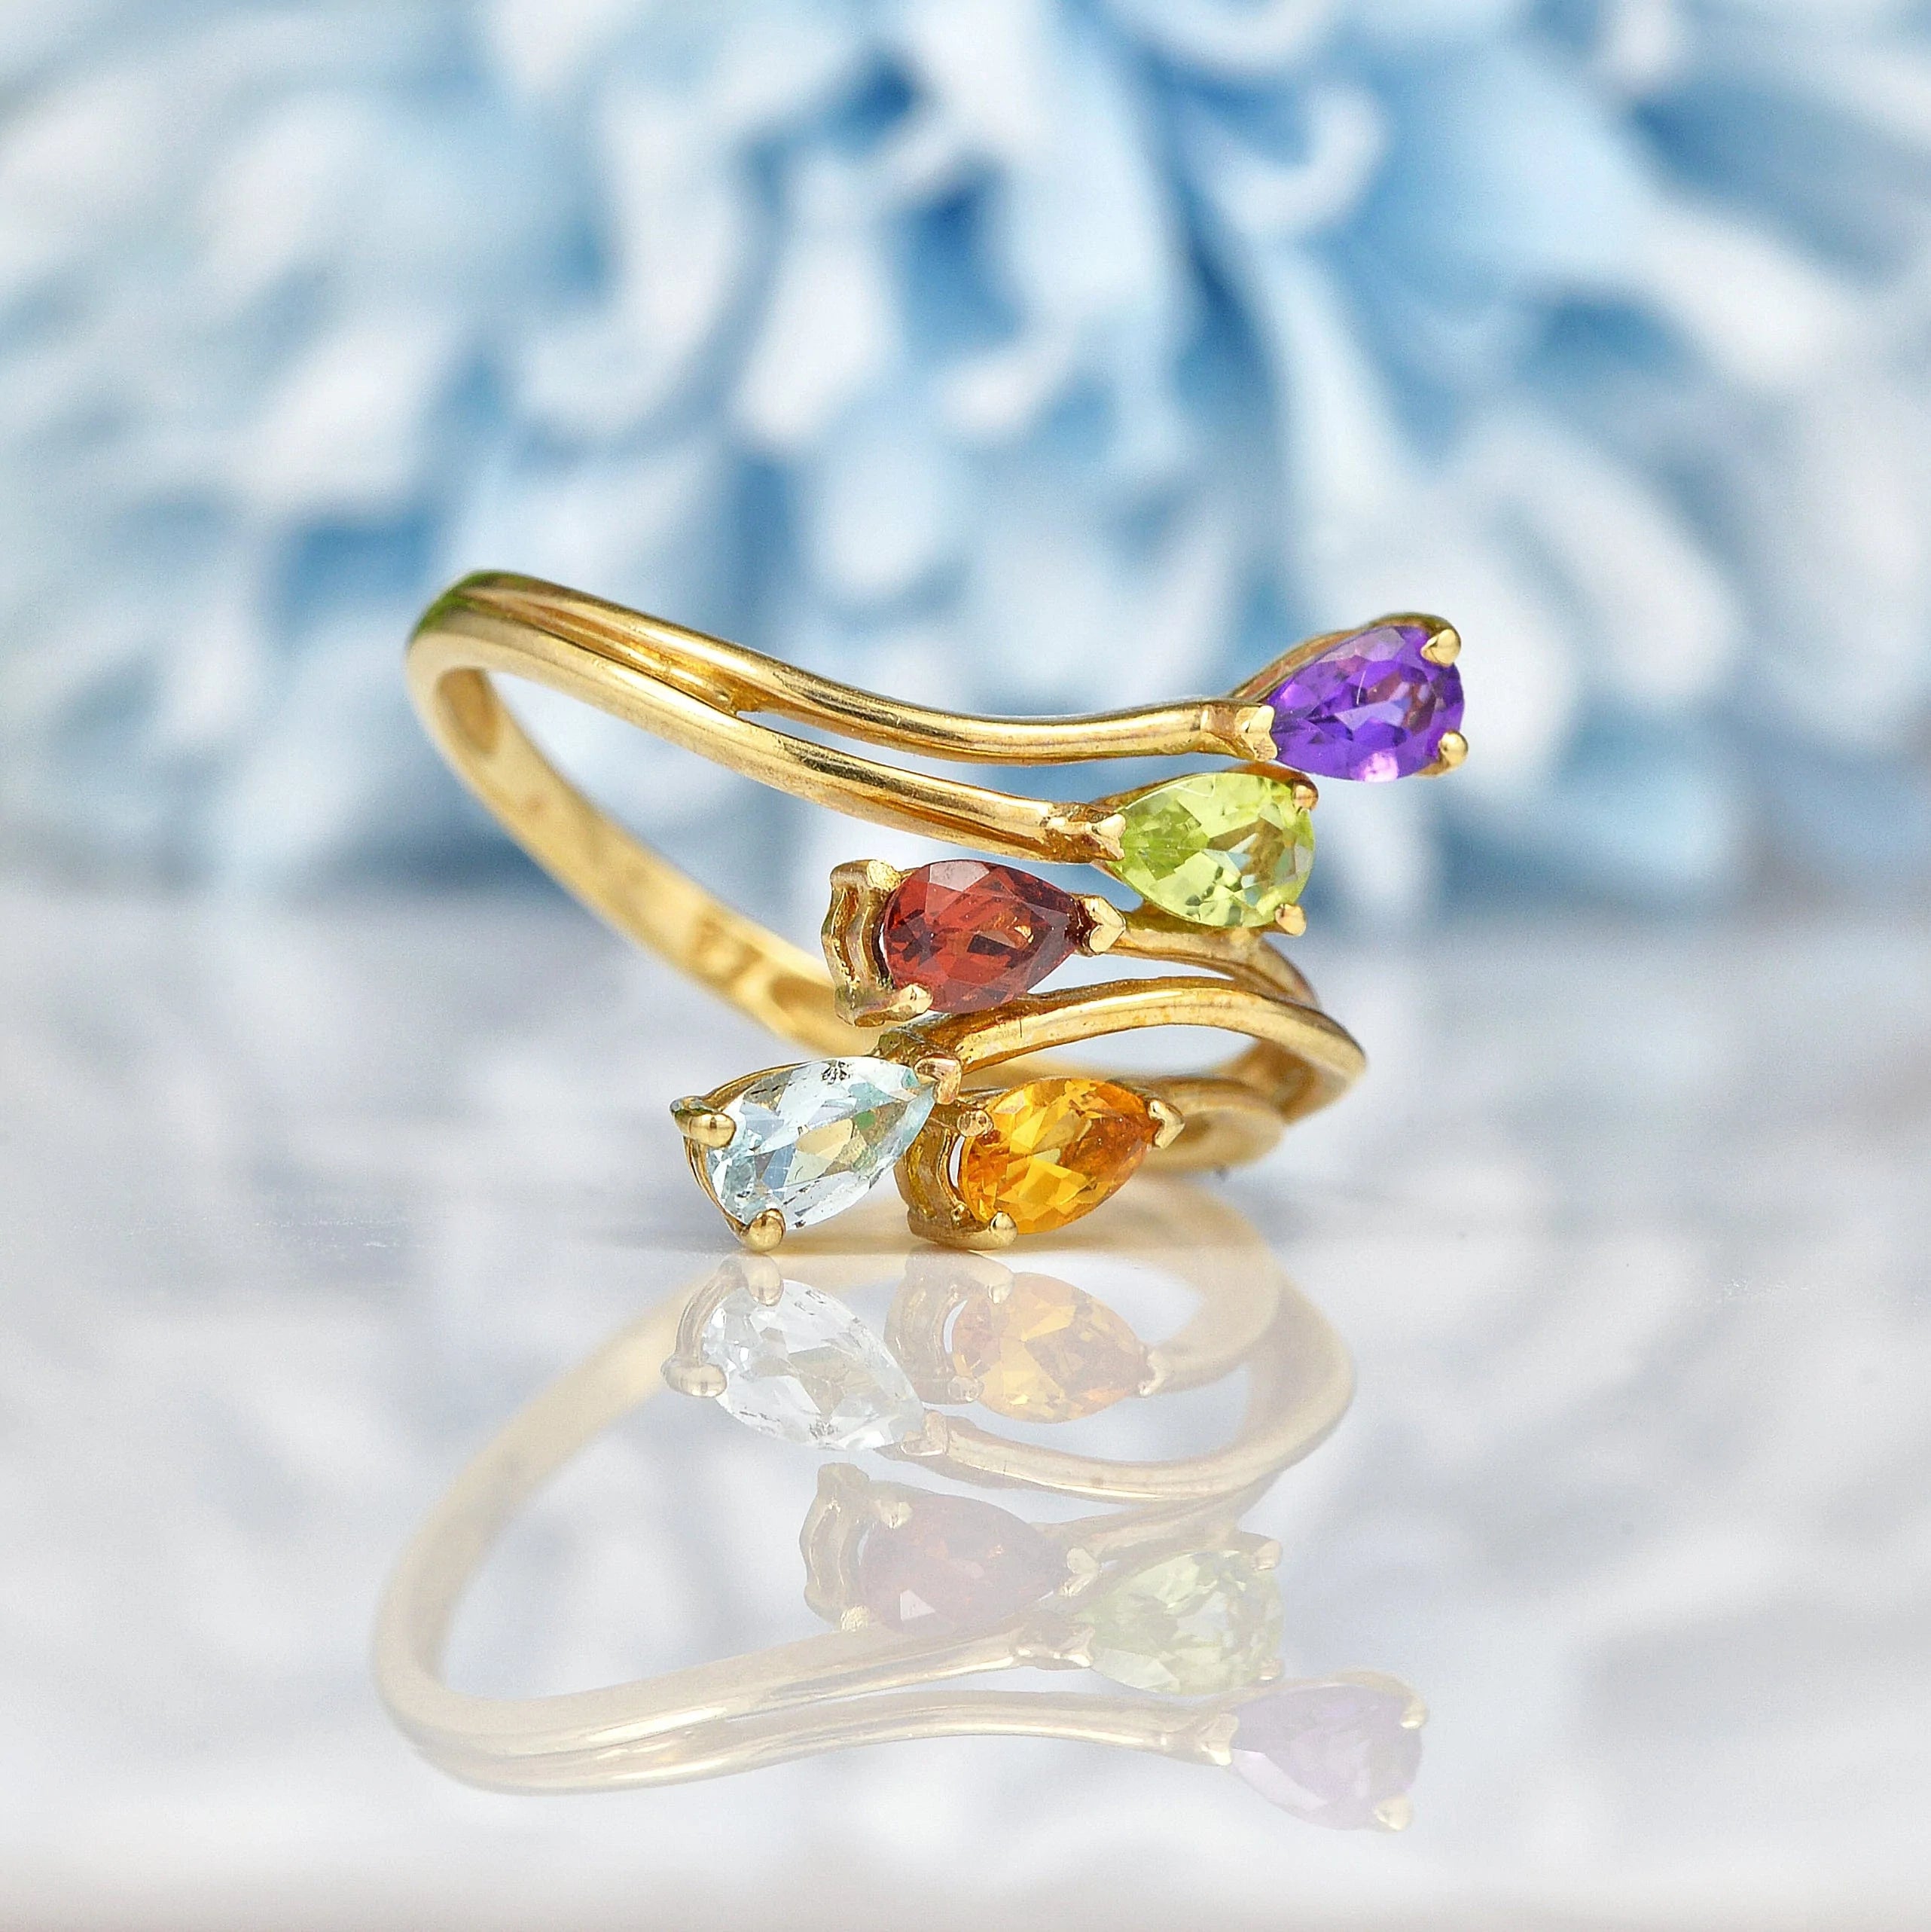 Ellibelle Jewellery Multi Gem Pear Shaped 9ct Gold Crossover Ring